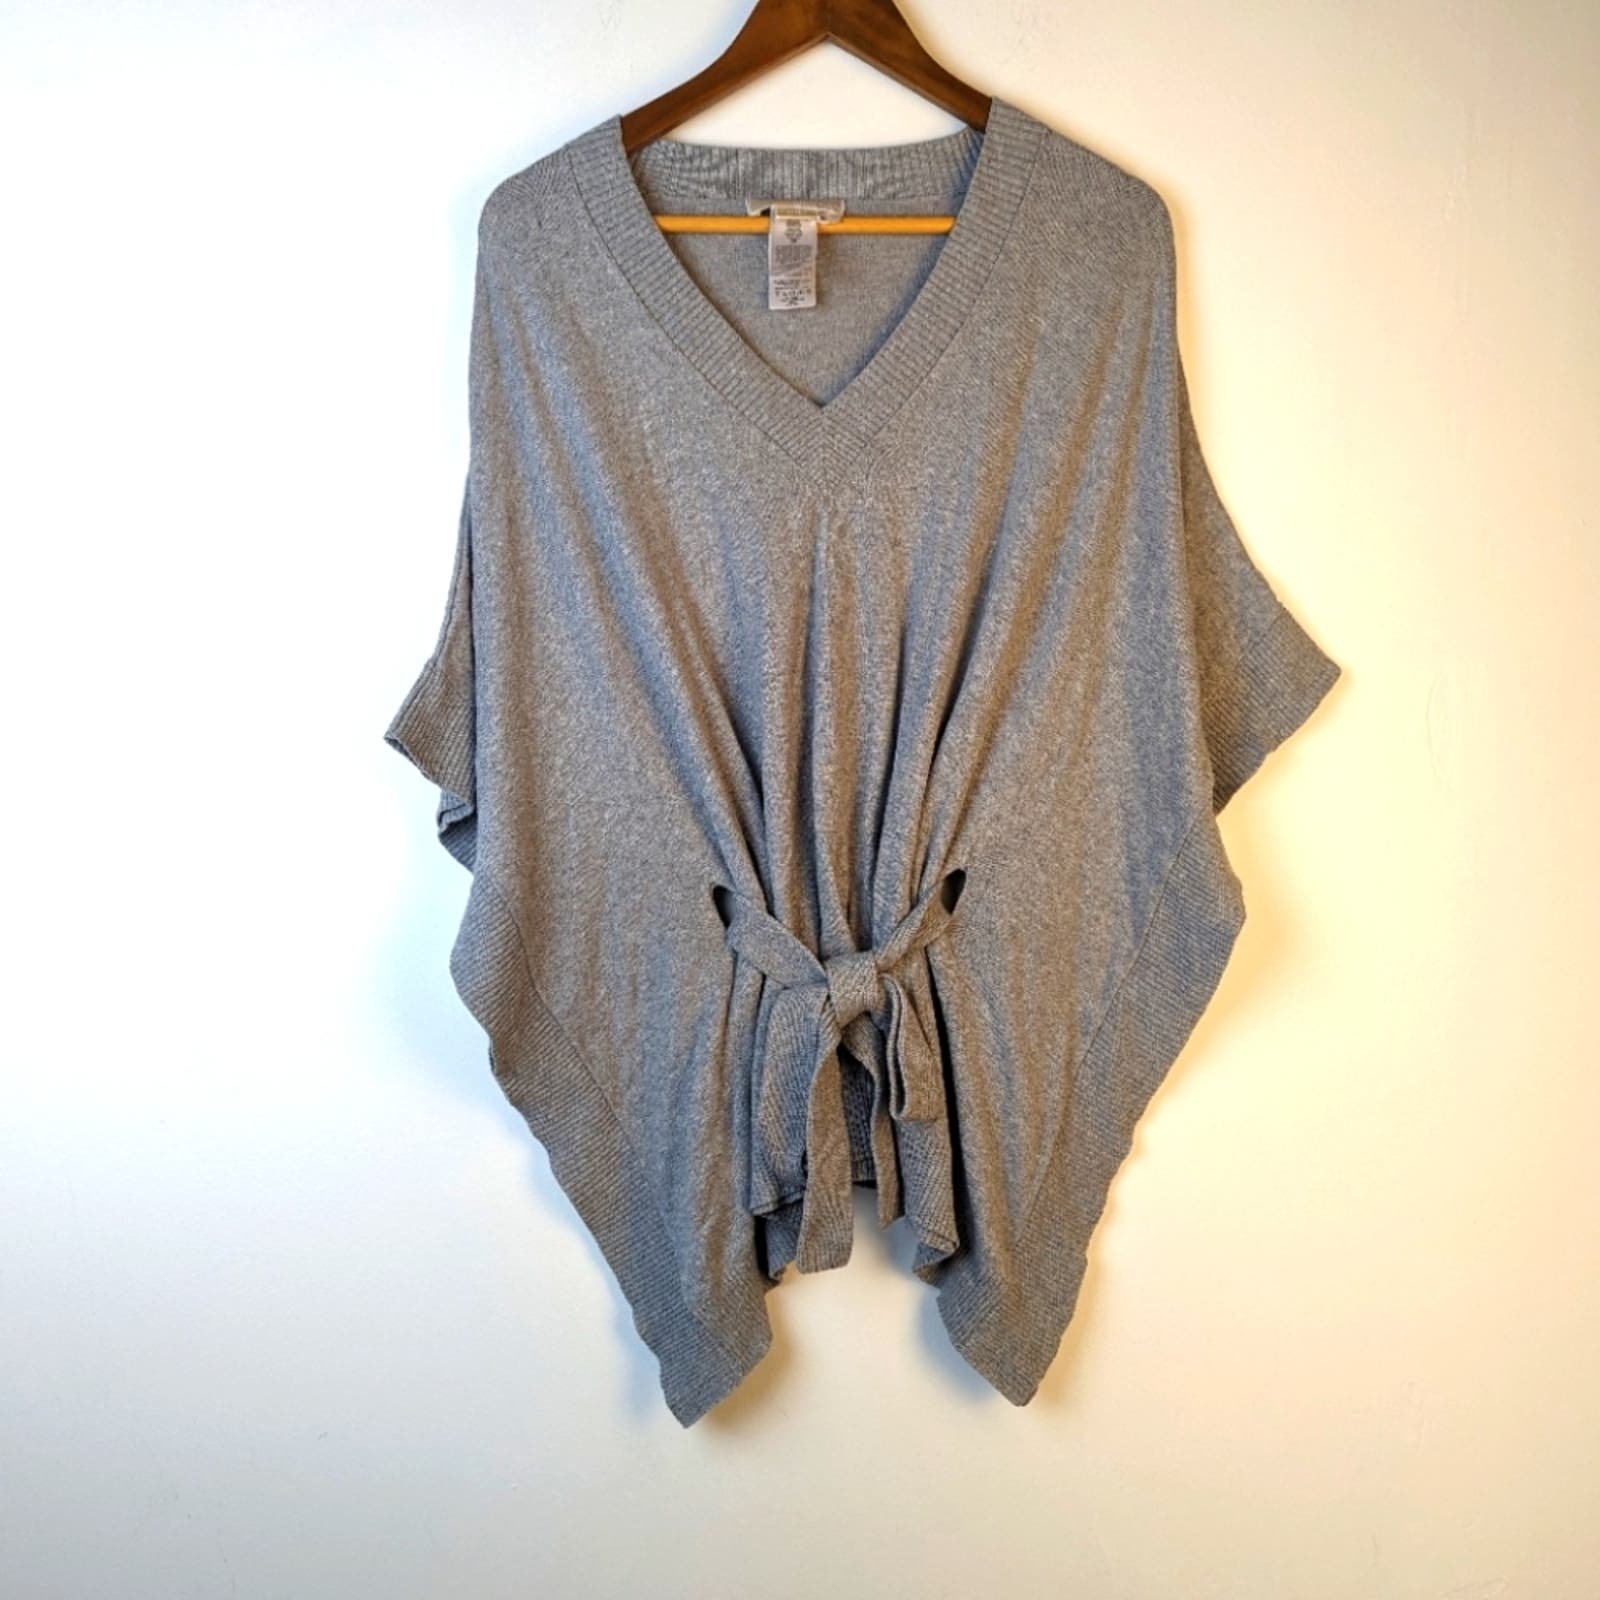 Gorgeous Michael Kors Poncho Sweater - Small GhKSLTLQn Discount